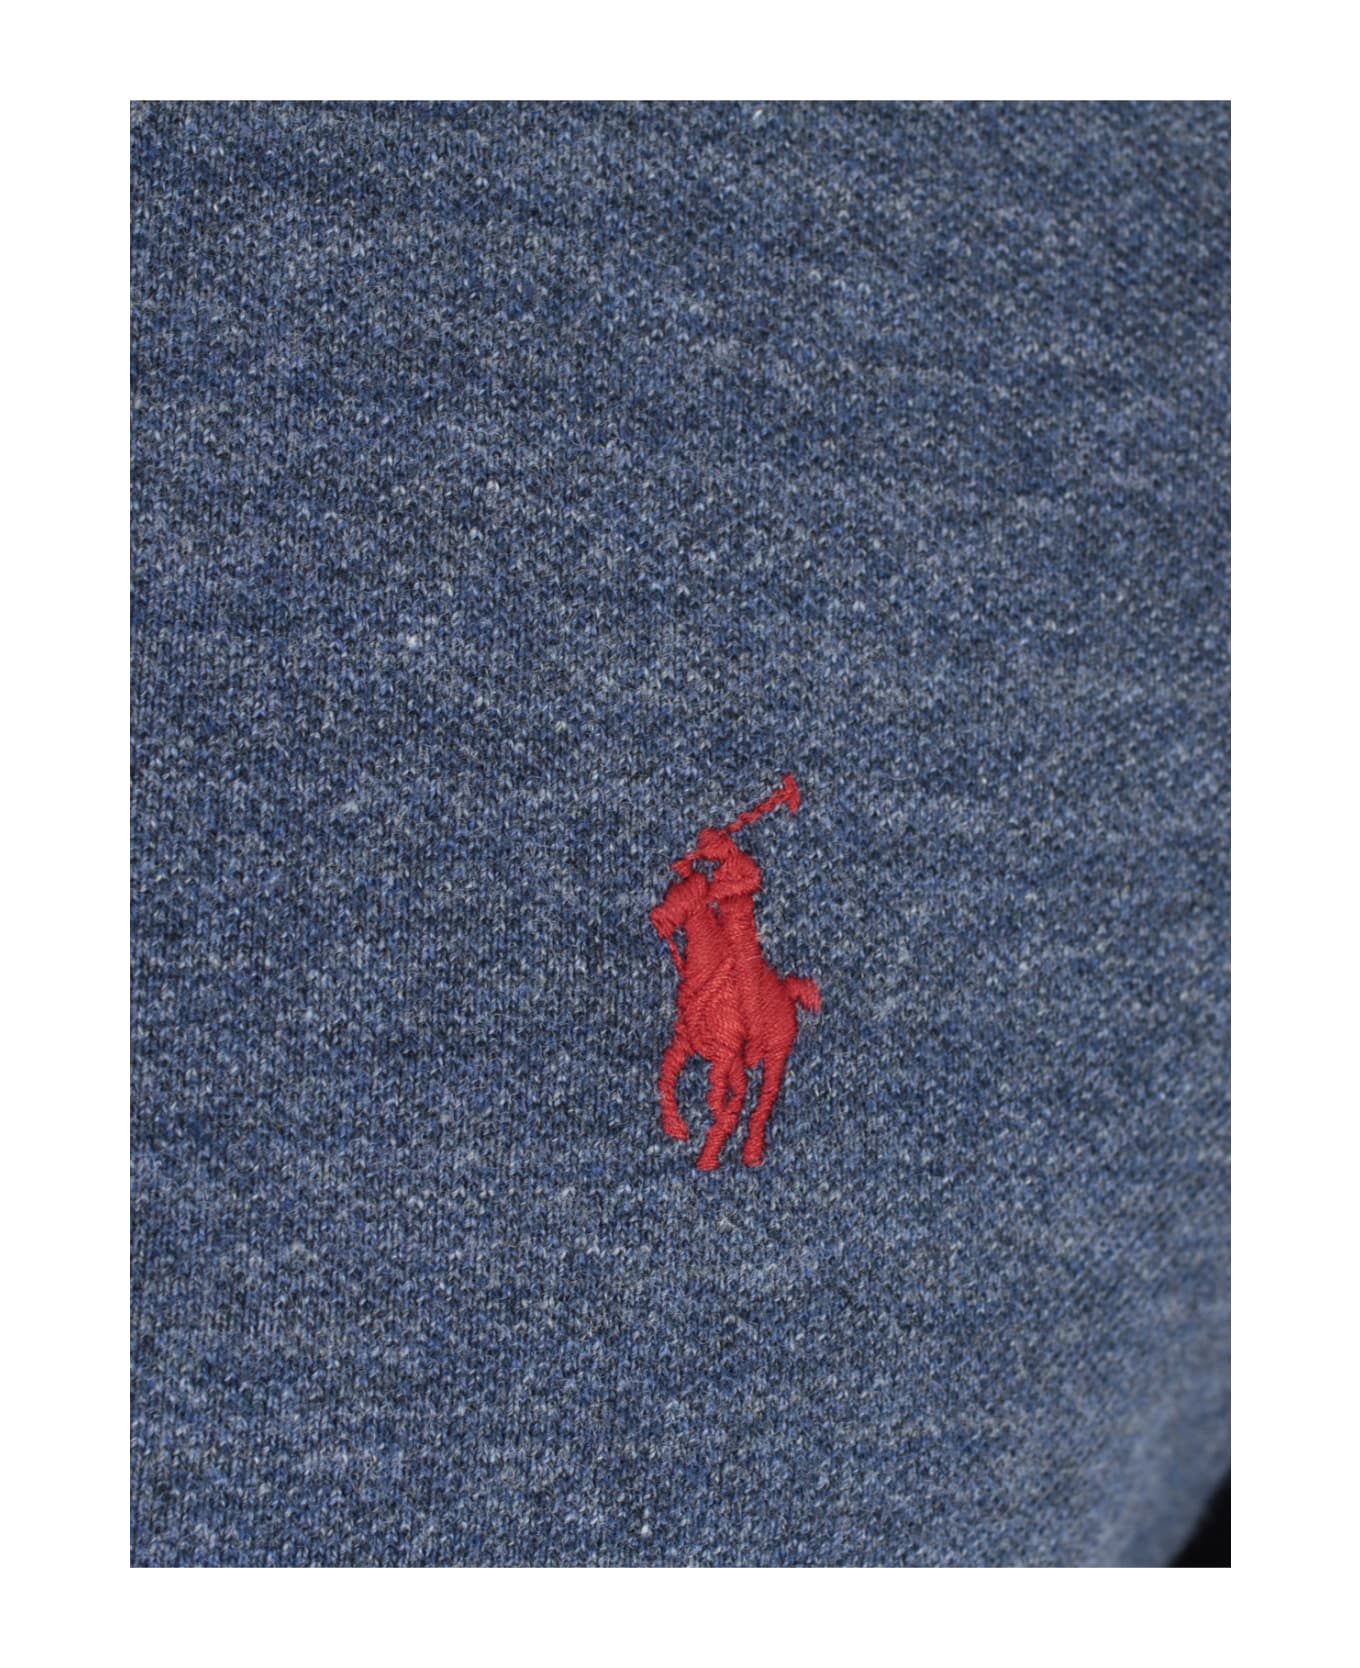 Ralph Lauren Polo Shirt S/s Slim Fit Knit - Classic Royal Heather ポロシャツ